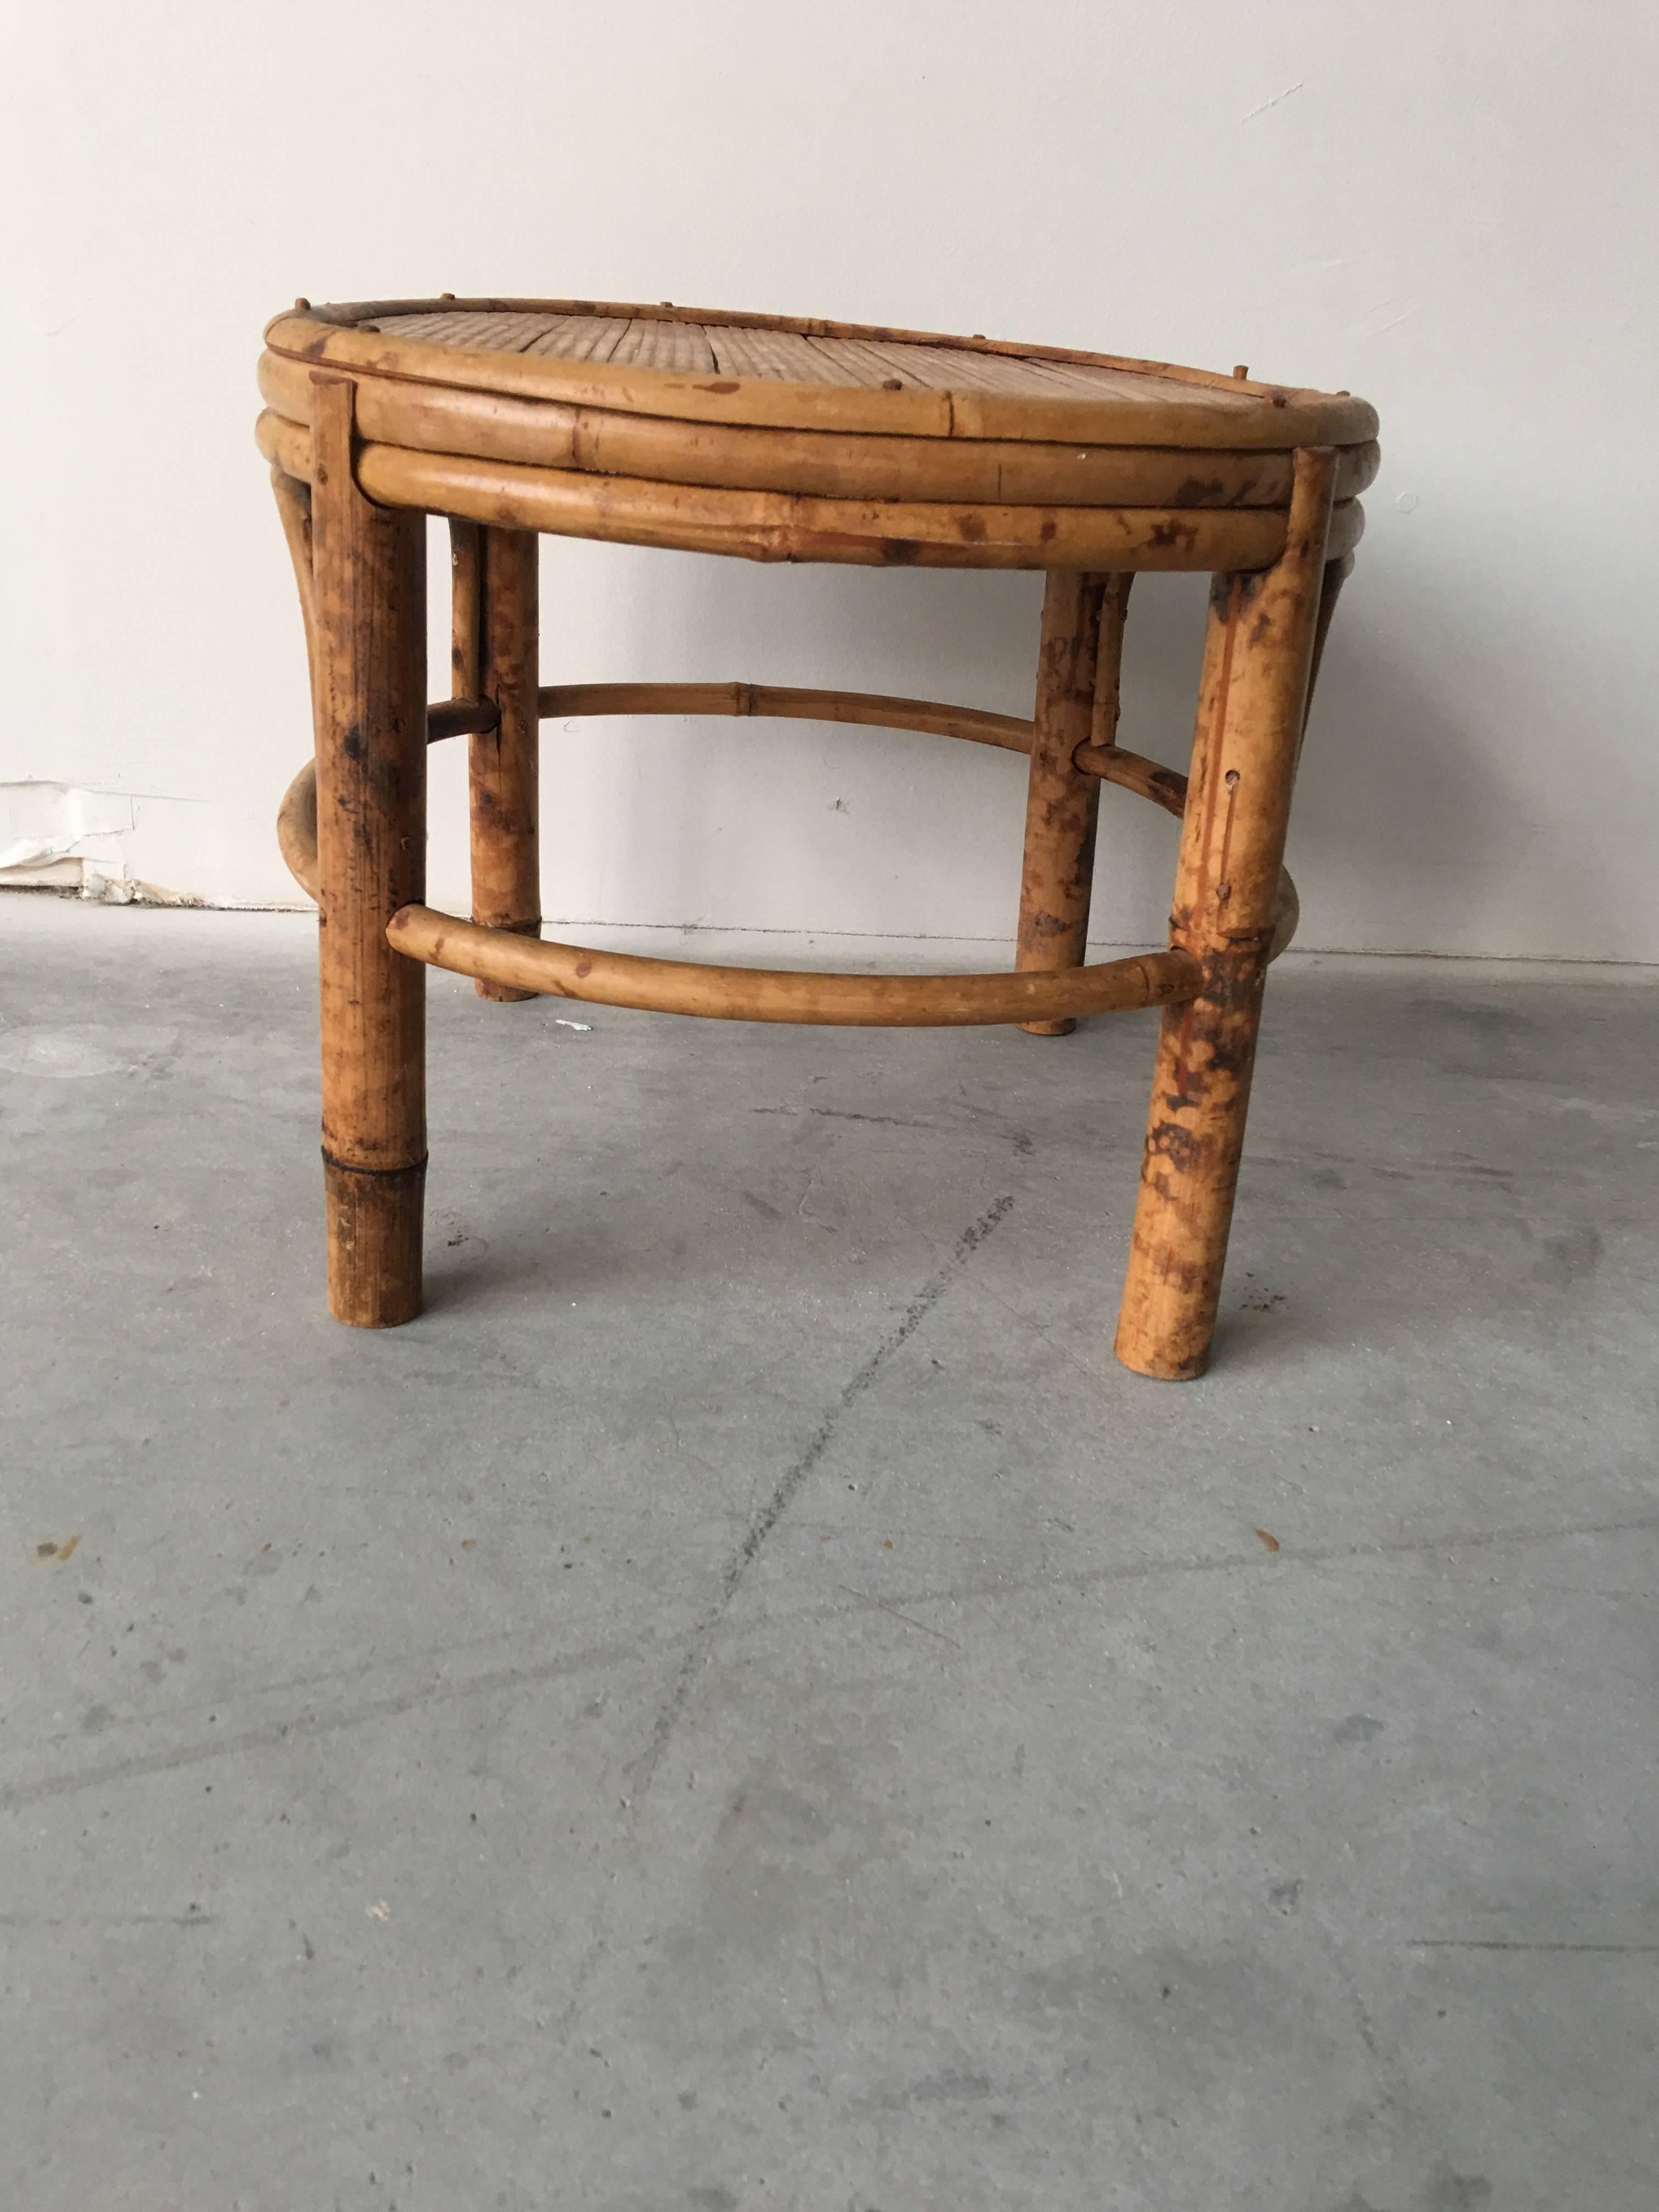 Offered is a fabulous, small 19th century bamboo stool.